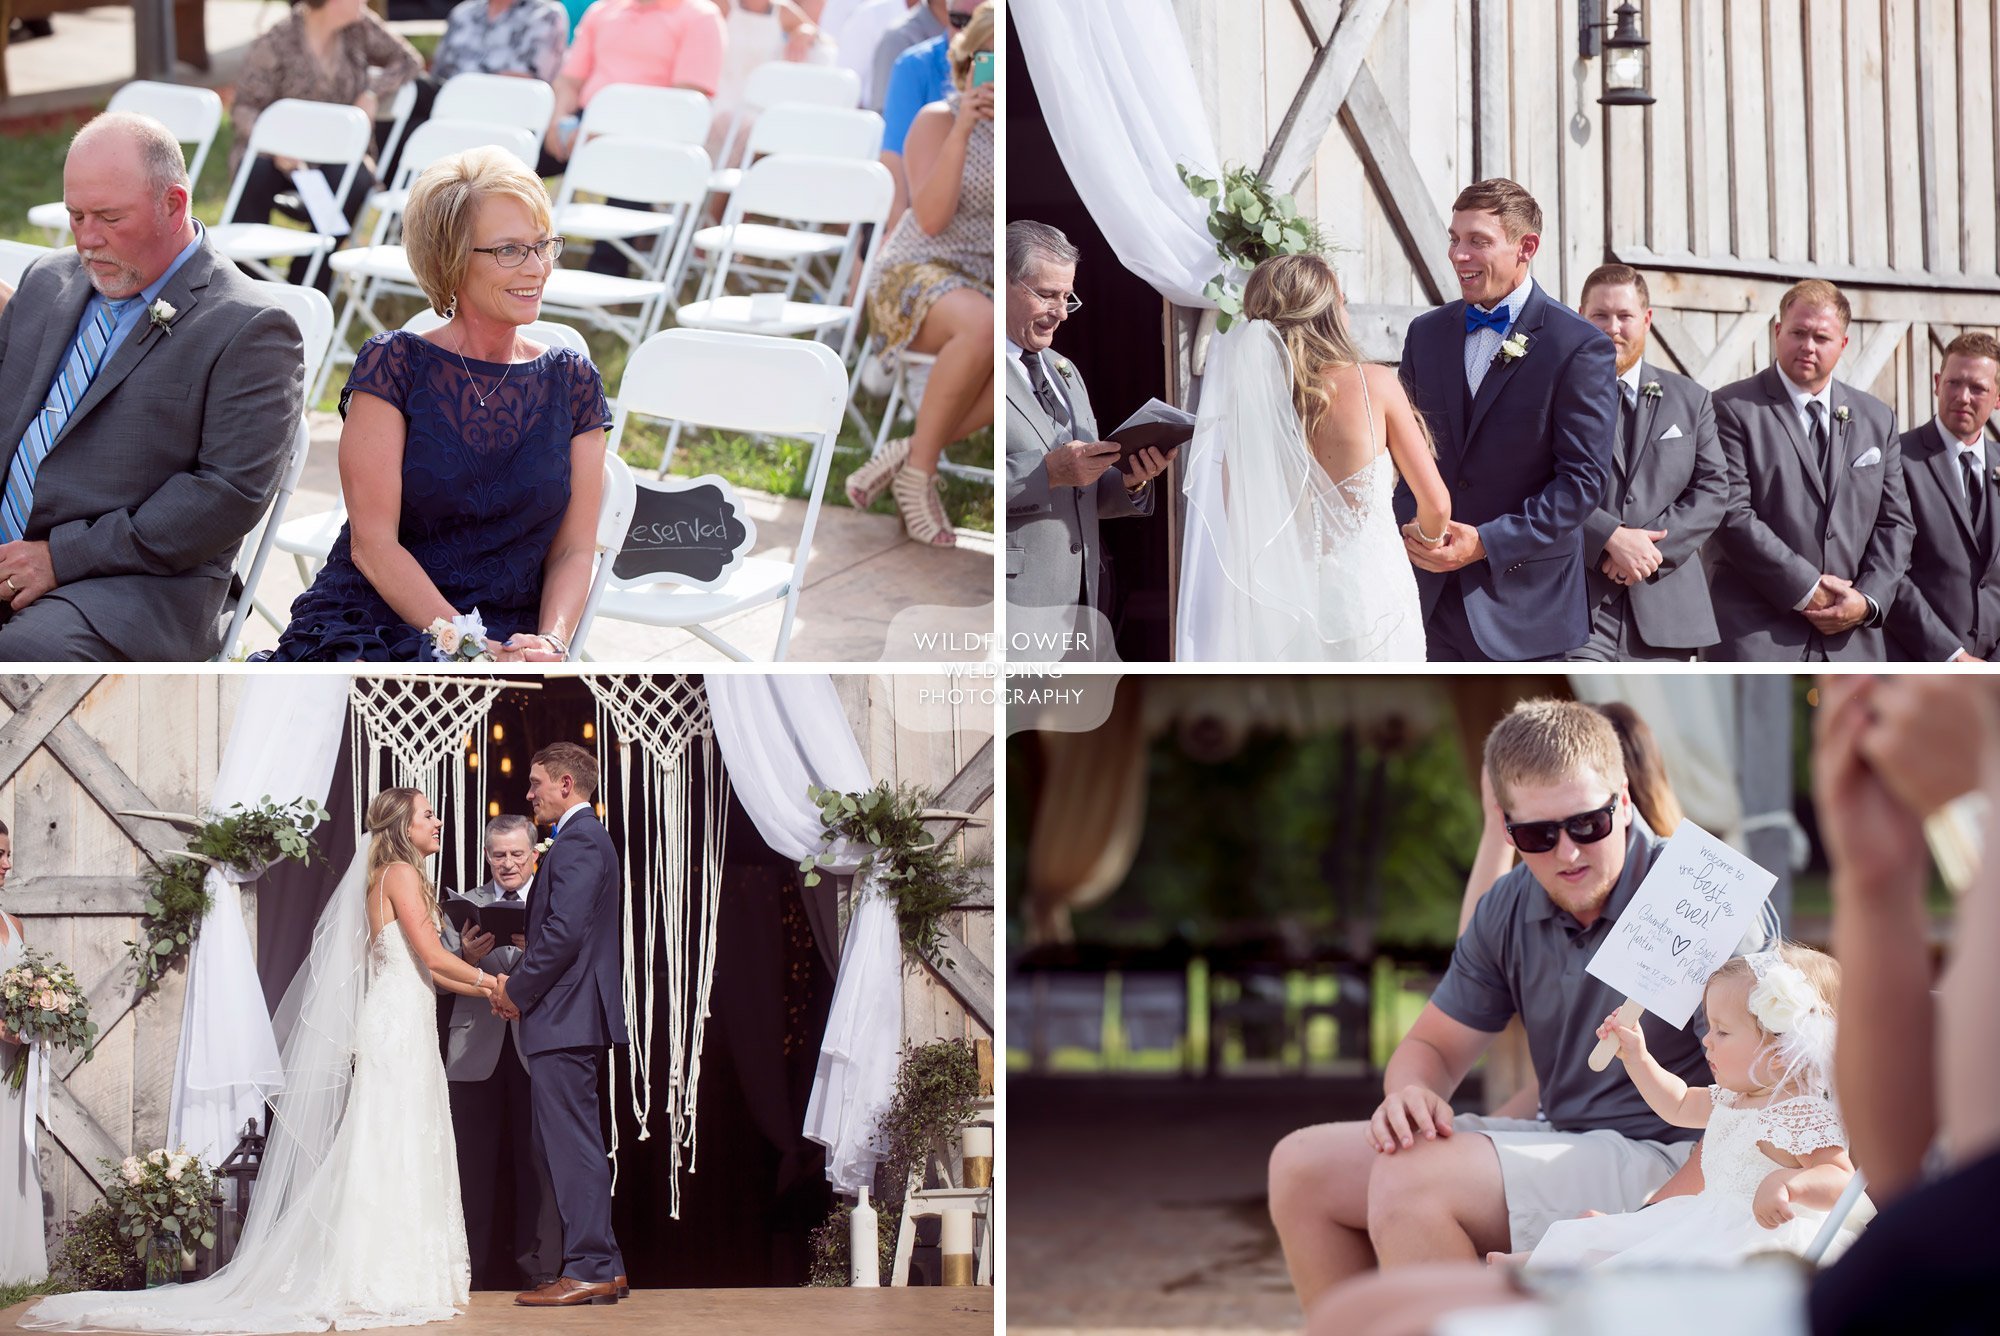 Documentary photos of the wedding ceremony guests watching the bride and groom at this barn wedding venue in MO.